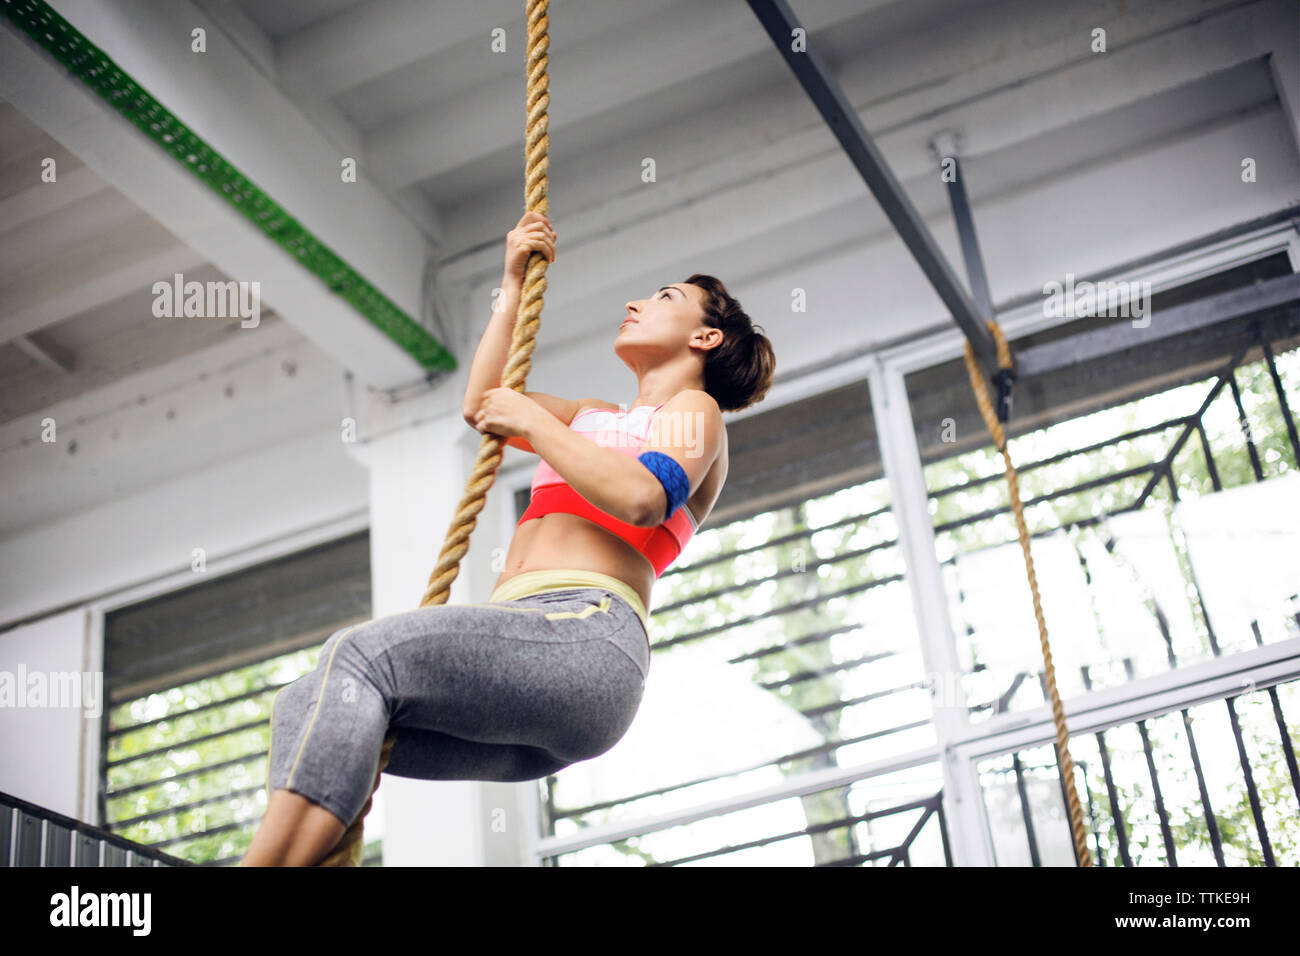 Young People Climbing Ropes In The Gym Stock Photo - Download Image Now -  Hanging, 25-29 Years, 30-39 Years - iStock